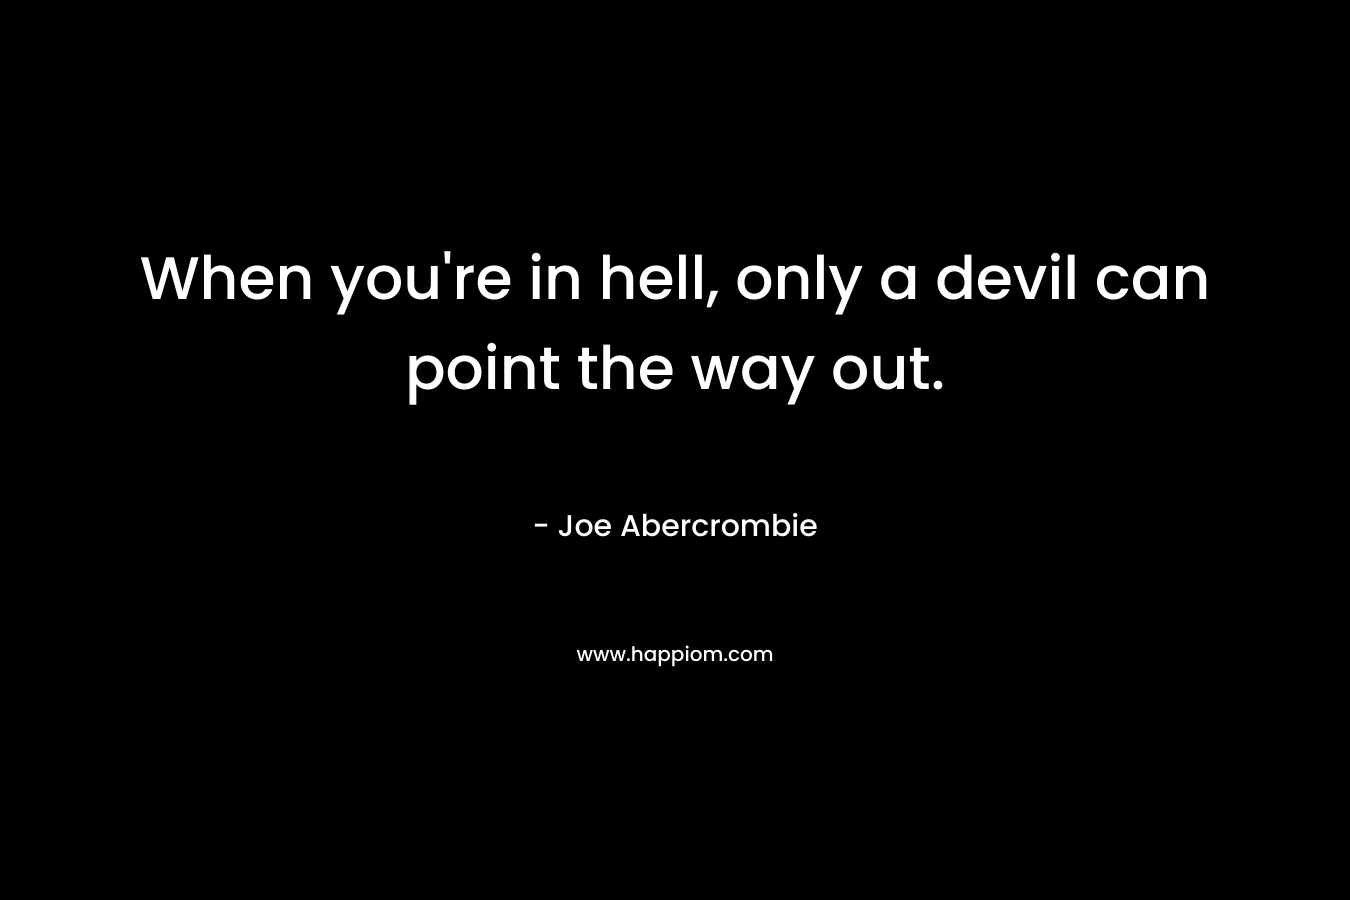 When you’re in hell, only a devil can point the way out. – Joe Abercrombie